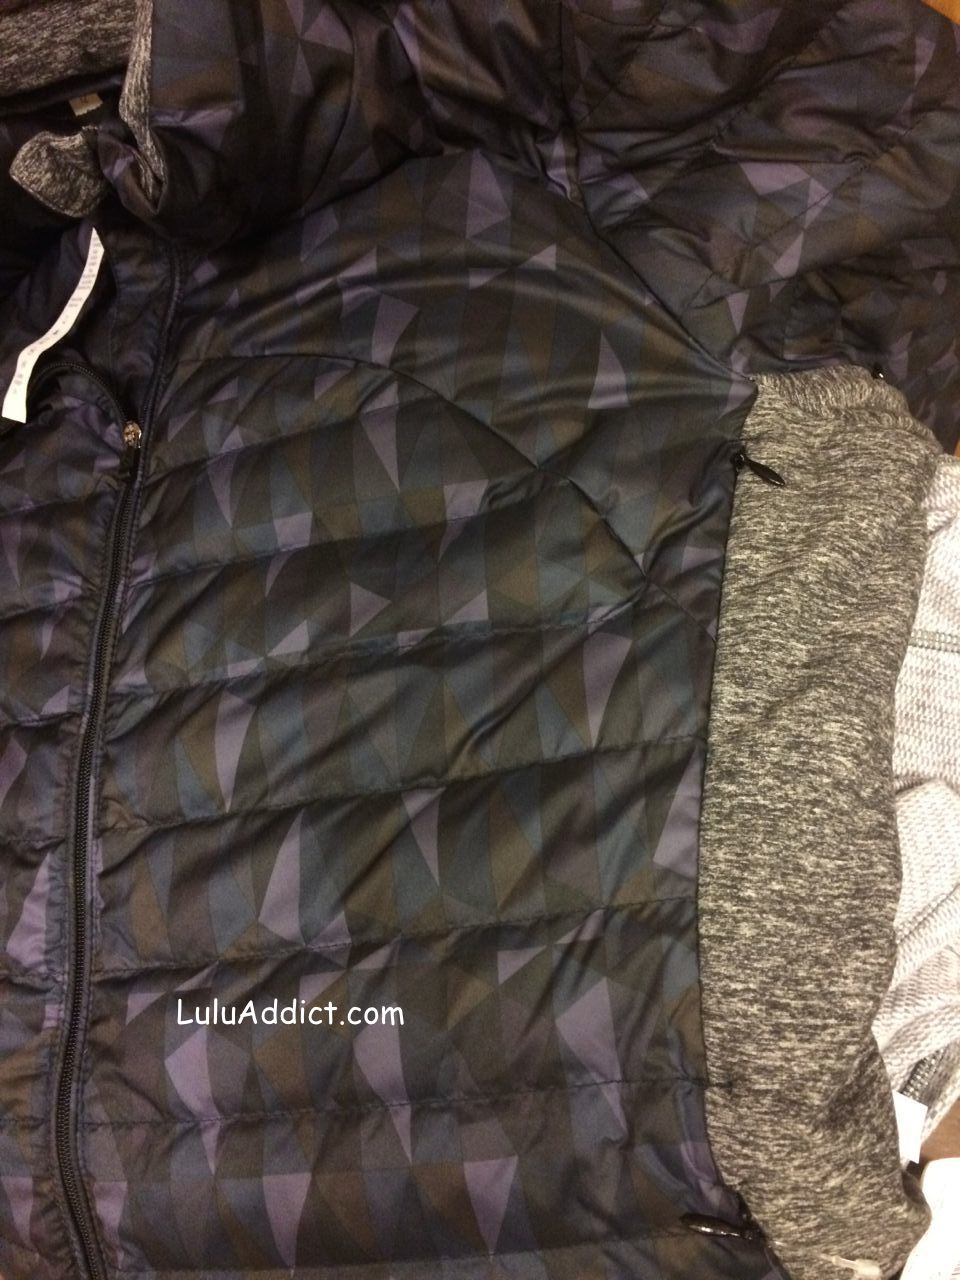 lululemon fluff off jacket stained glass